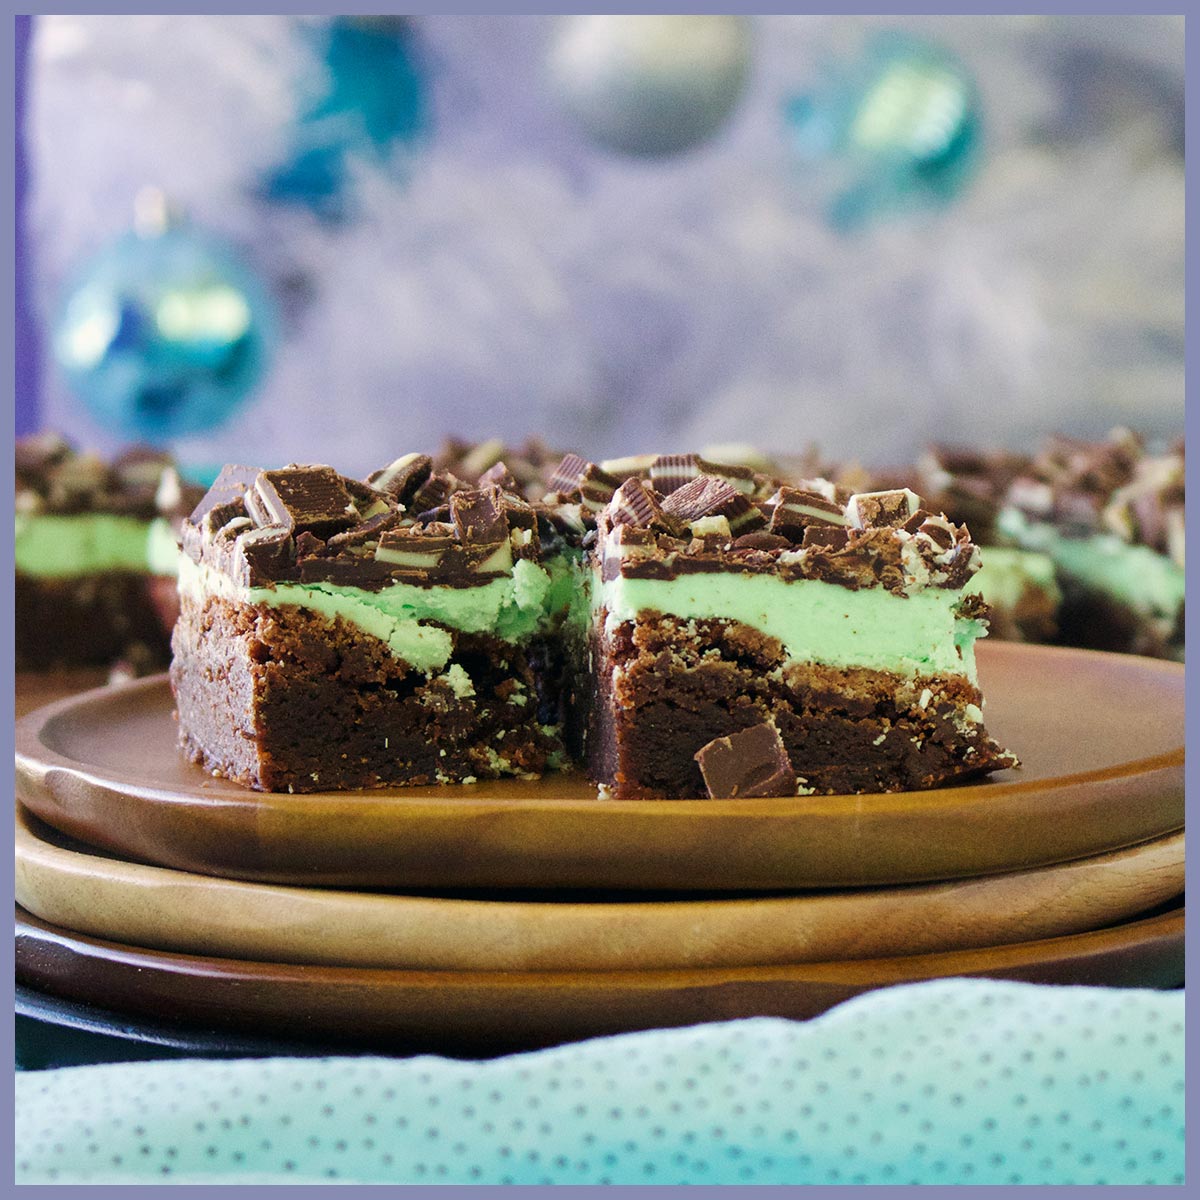 Two mint chocolate brownies on a wood plate.